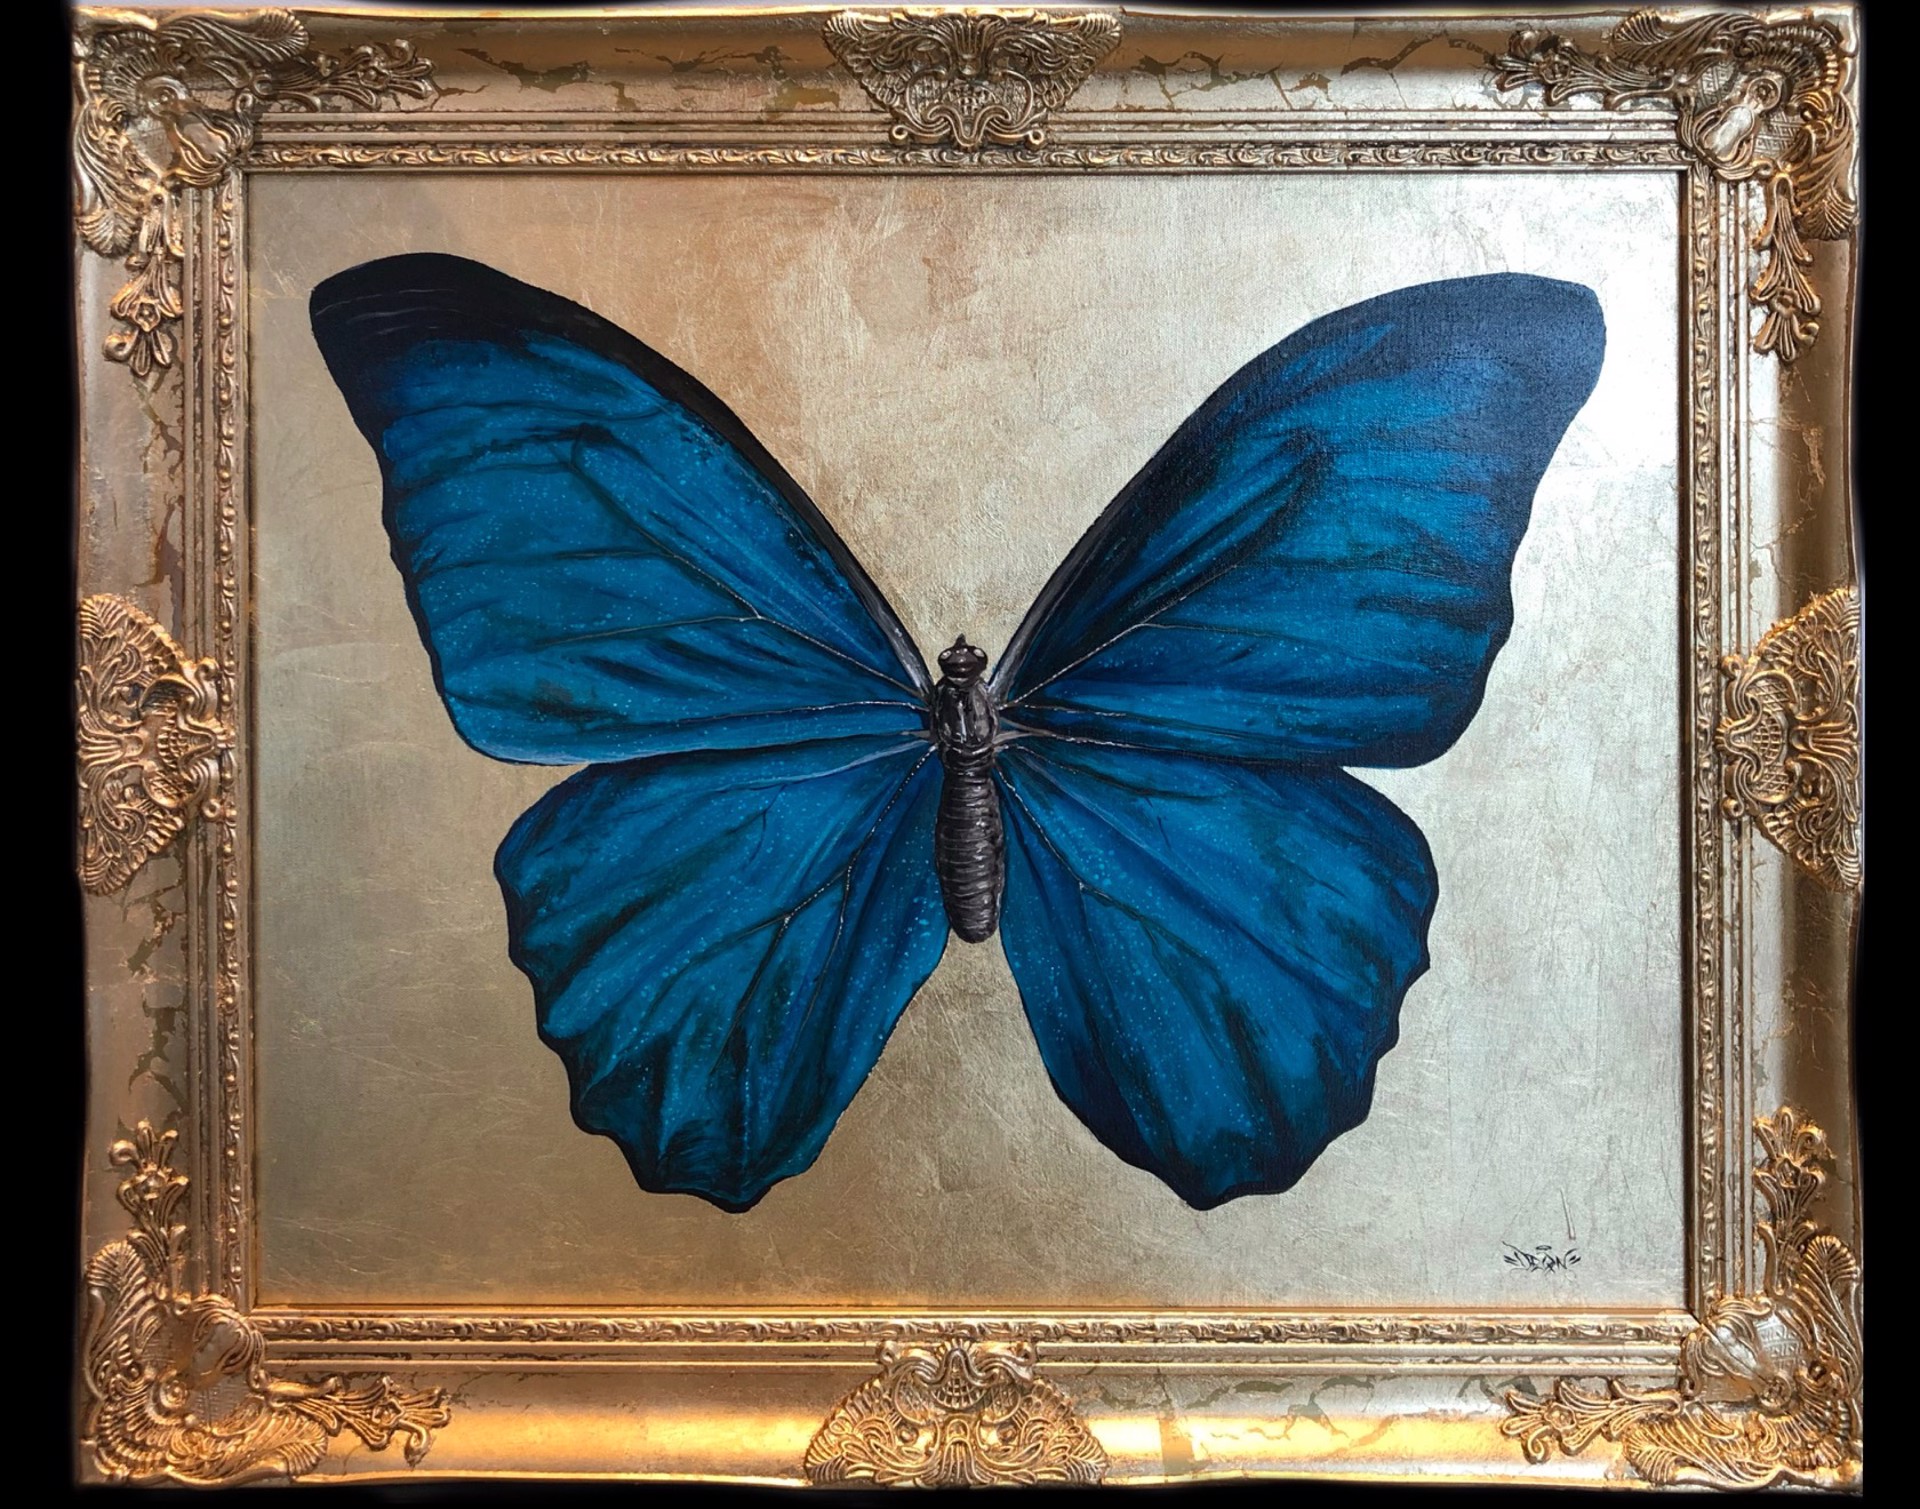 Teal Butterfly by Anthony Deon